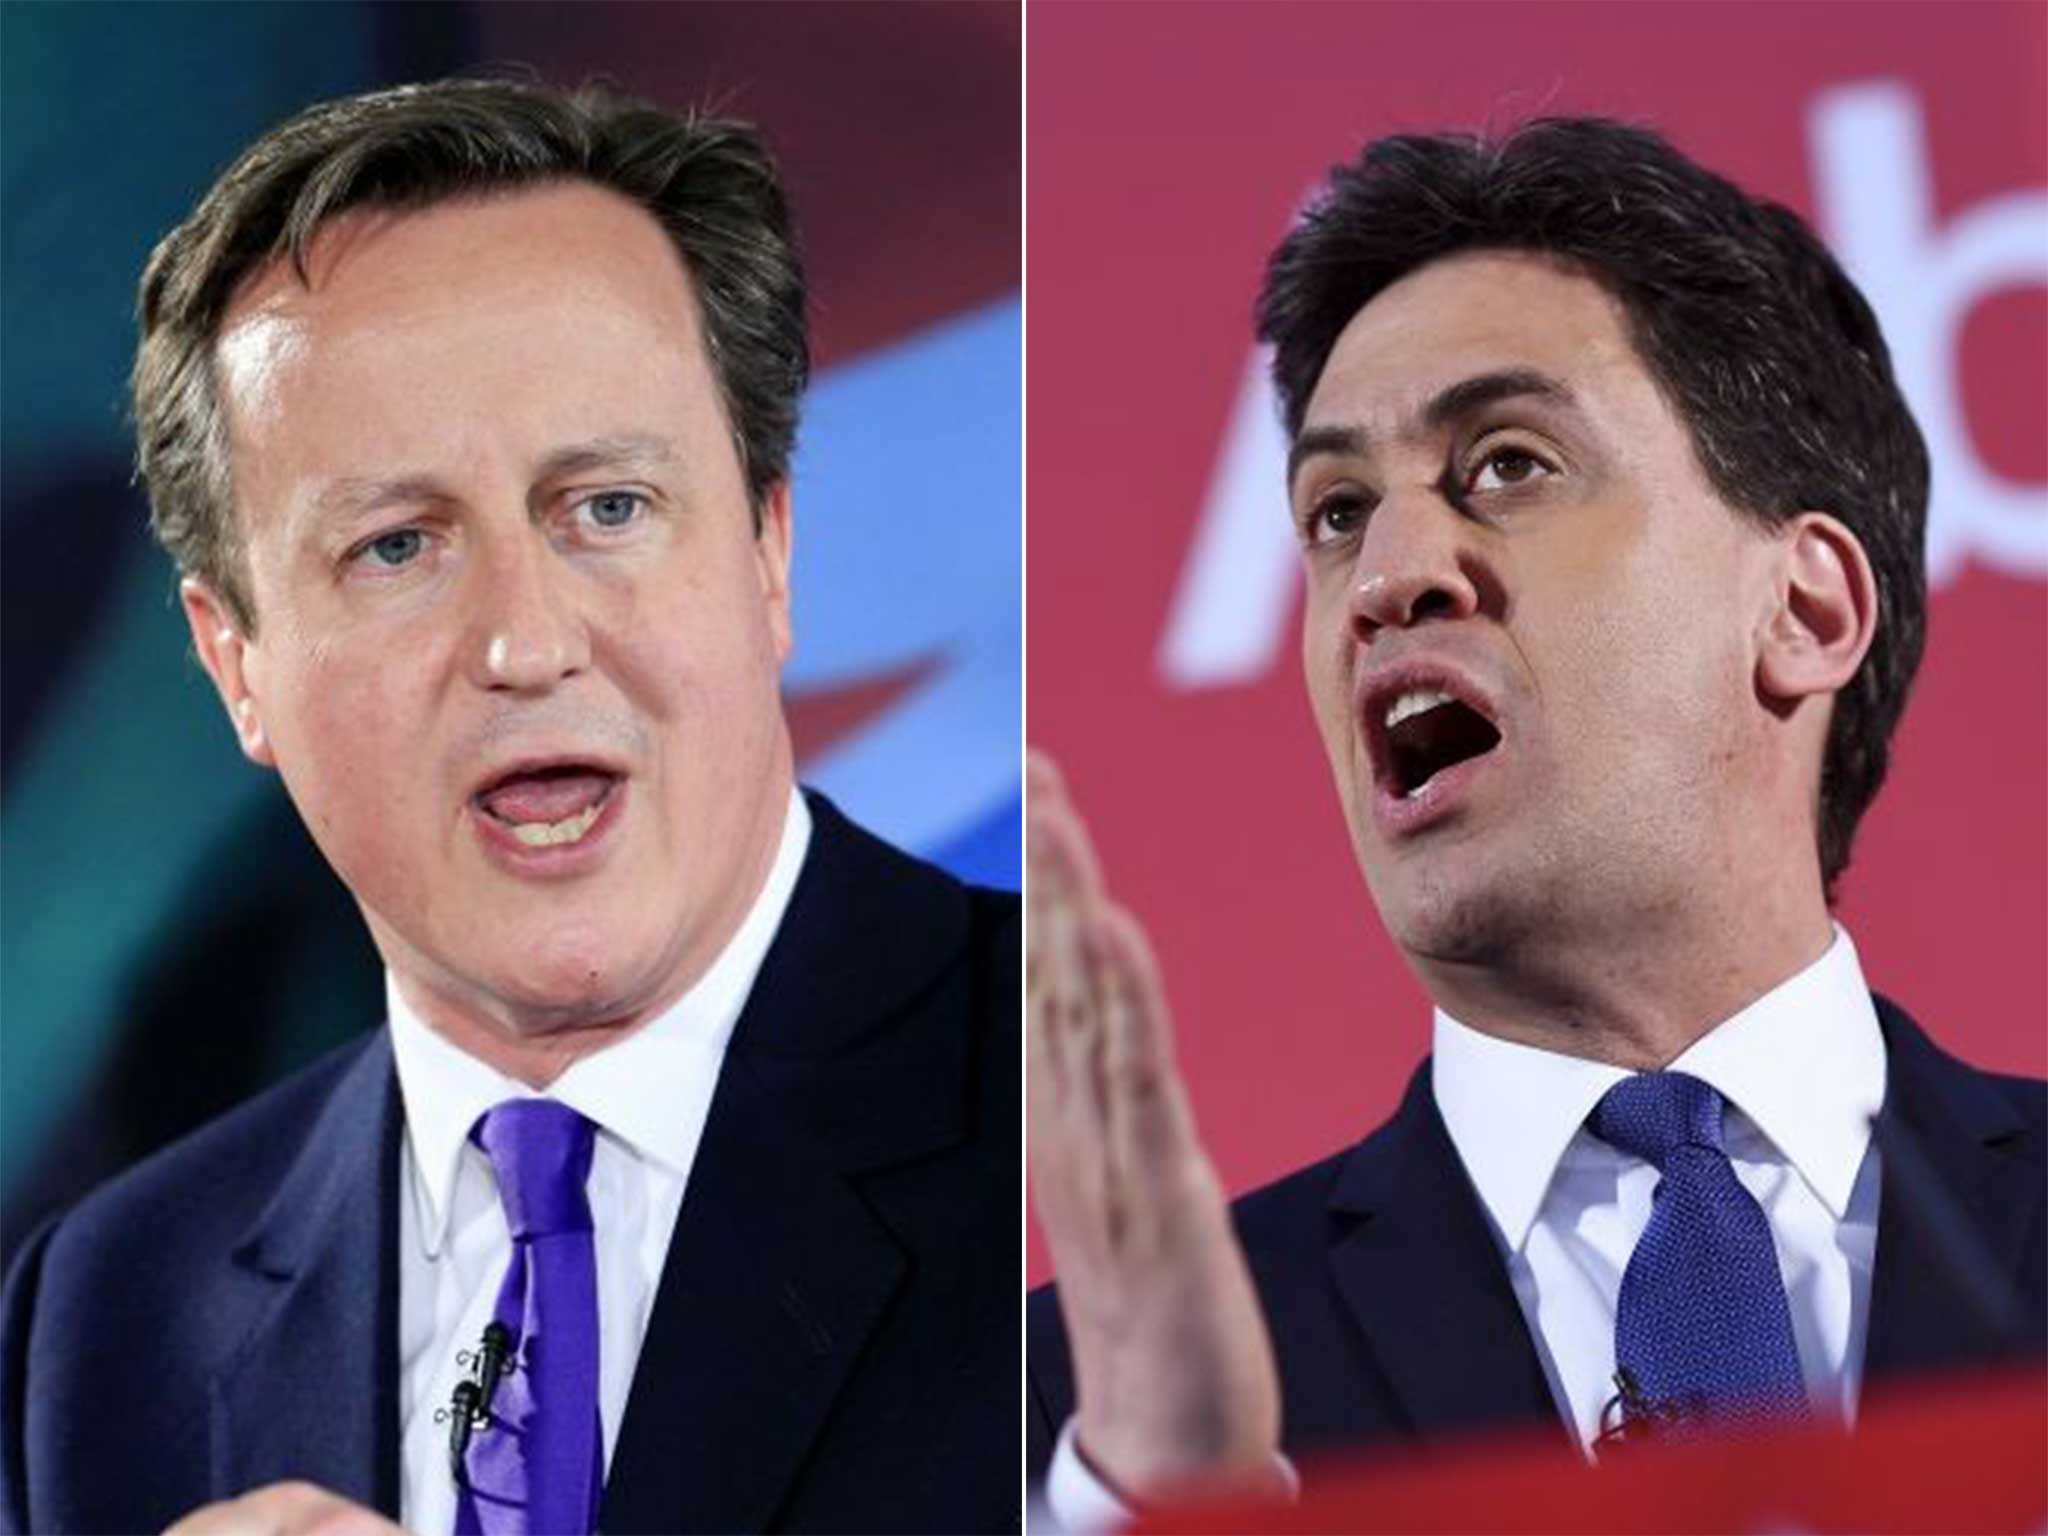 Ed Miliband said David Cameron was partly to blame for migrant crisis